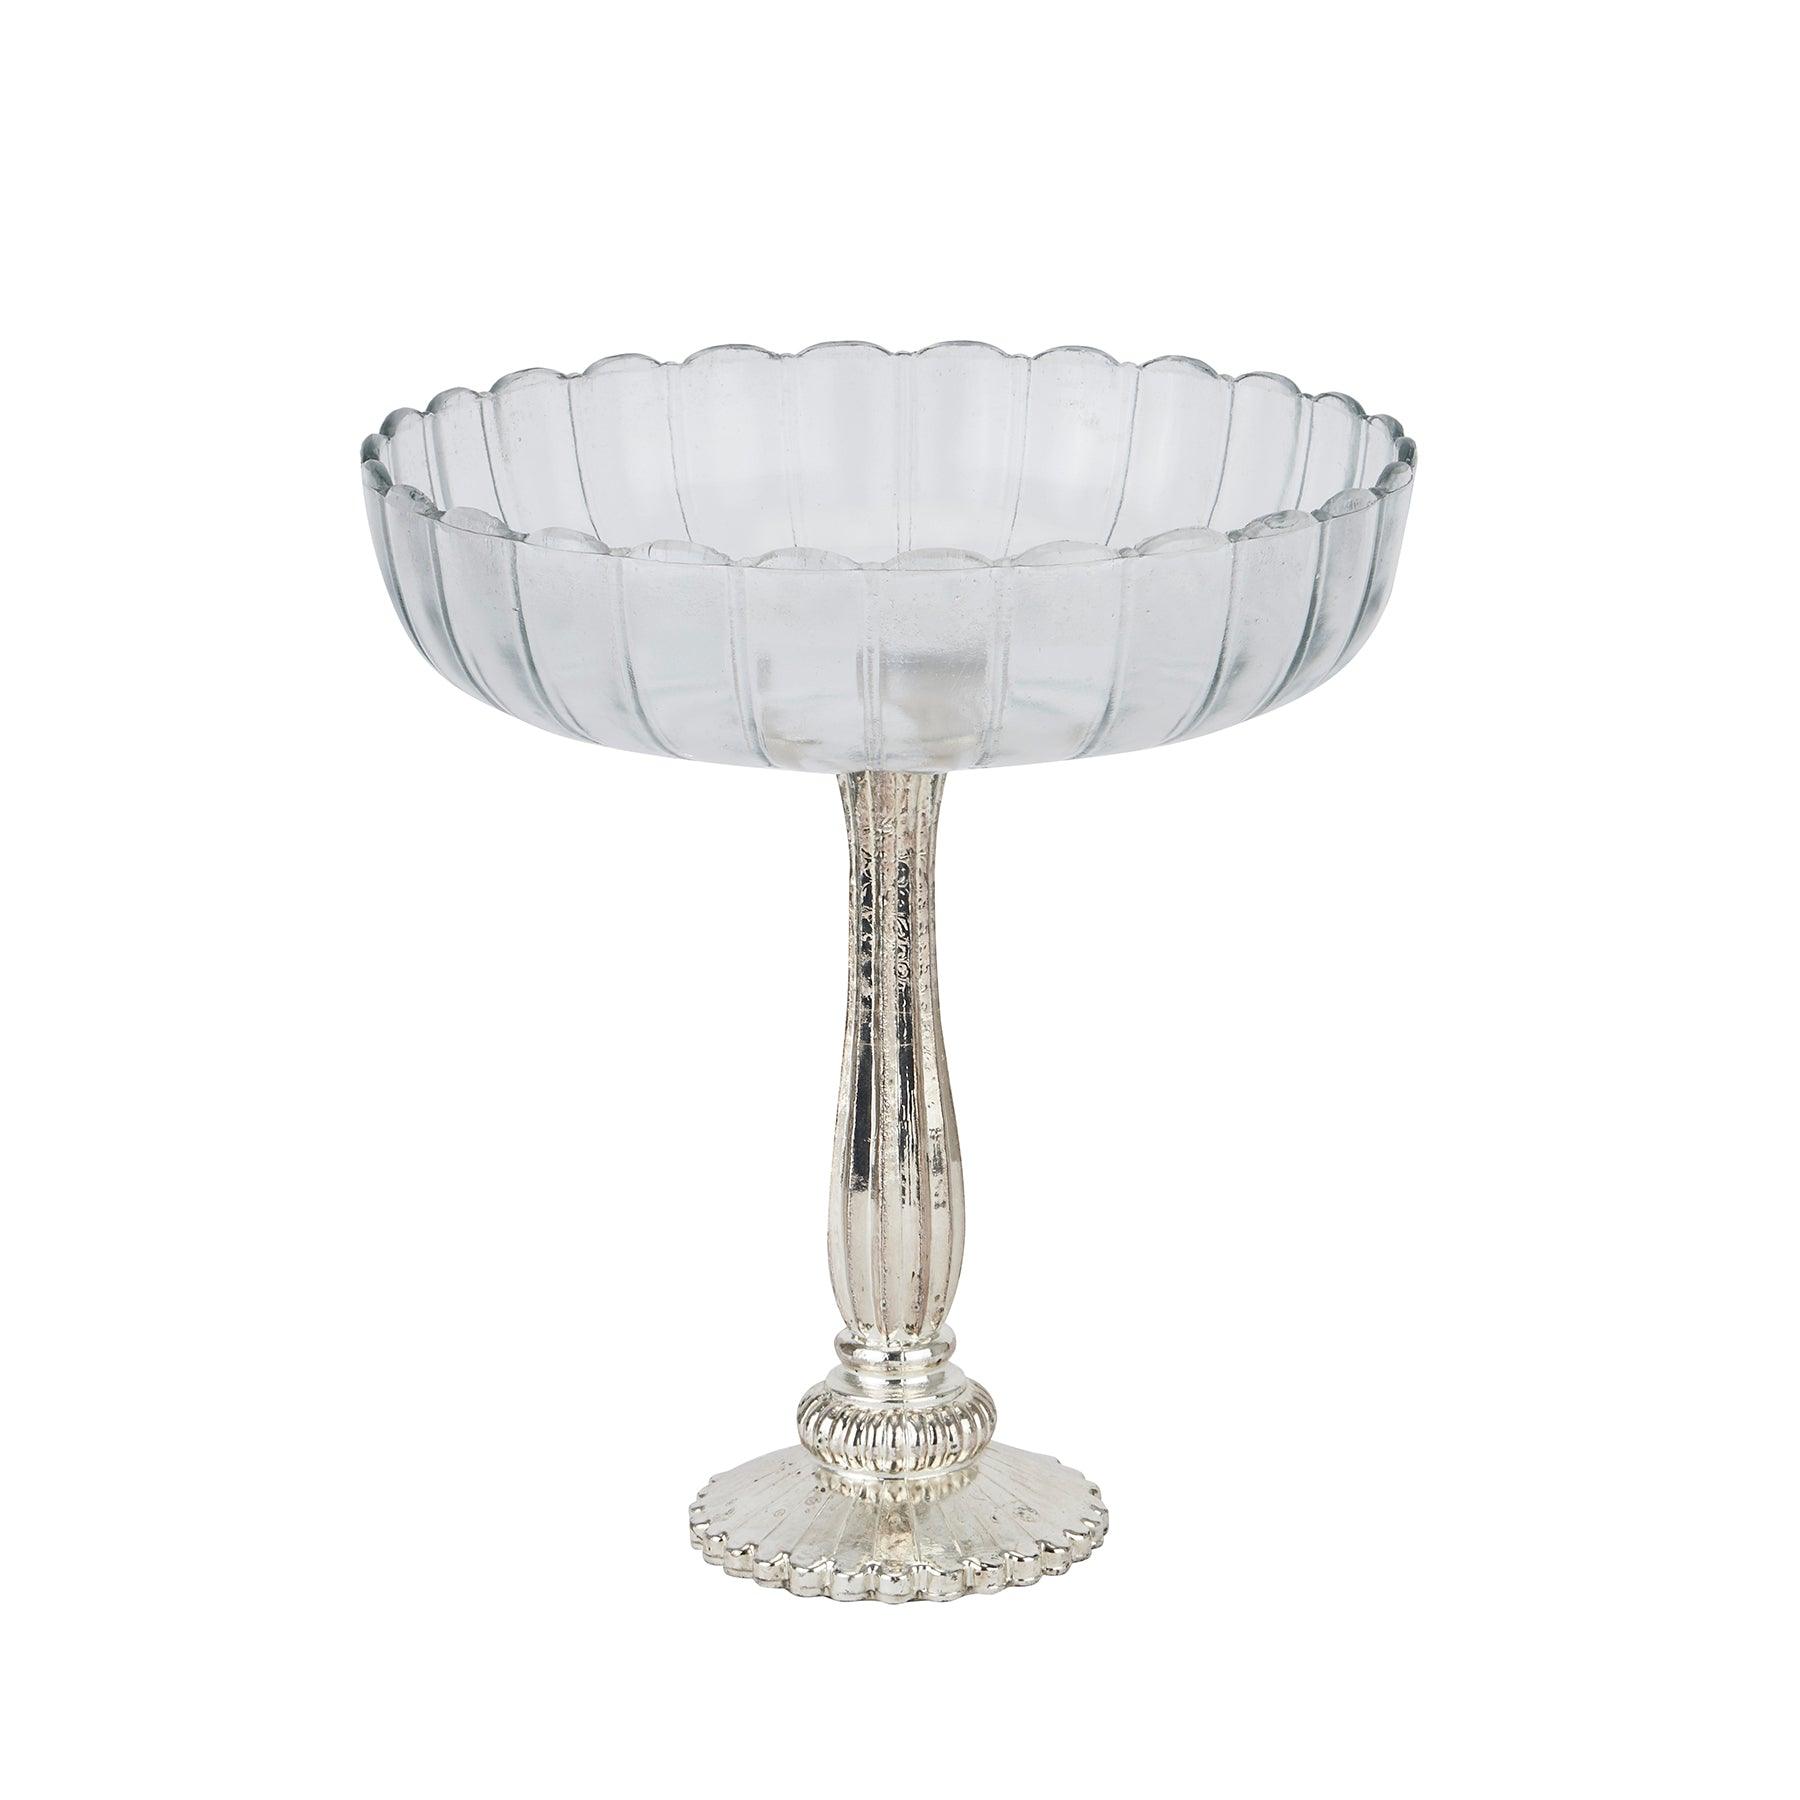 View Large Fluted Glass Display Bowl information